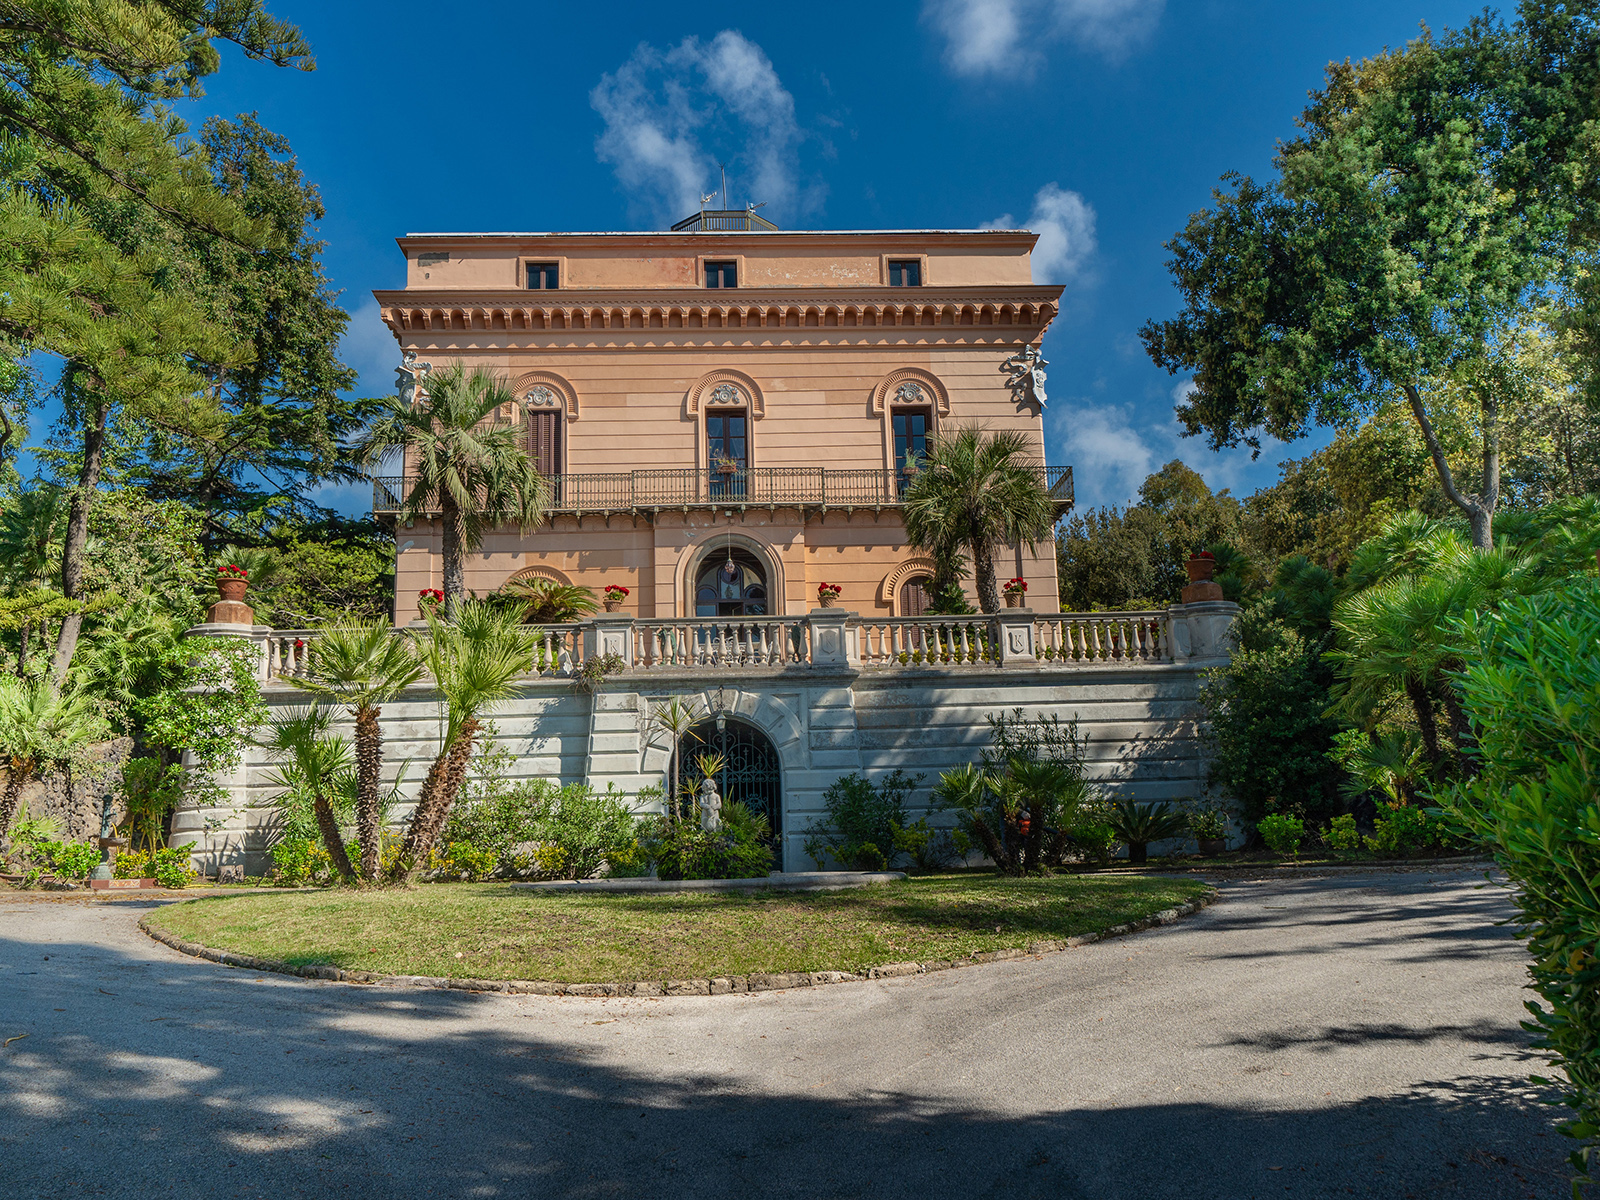 Set in peaceful surroundings but only a short distance from the city center, this 19th-century villa is some 16,145 square feet [1,500 sq m]. in size plus it has a large terrace. It also features 12 bedrooms and 10 bathrooms.